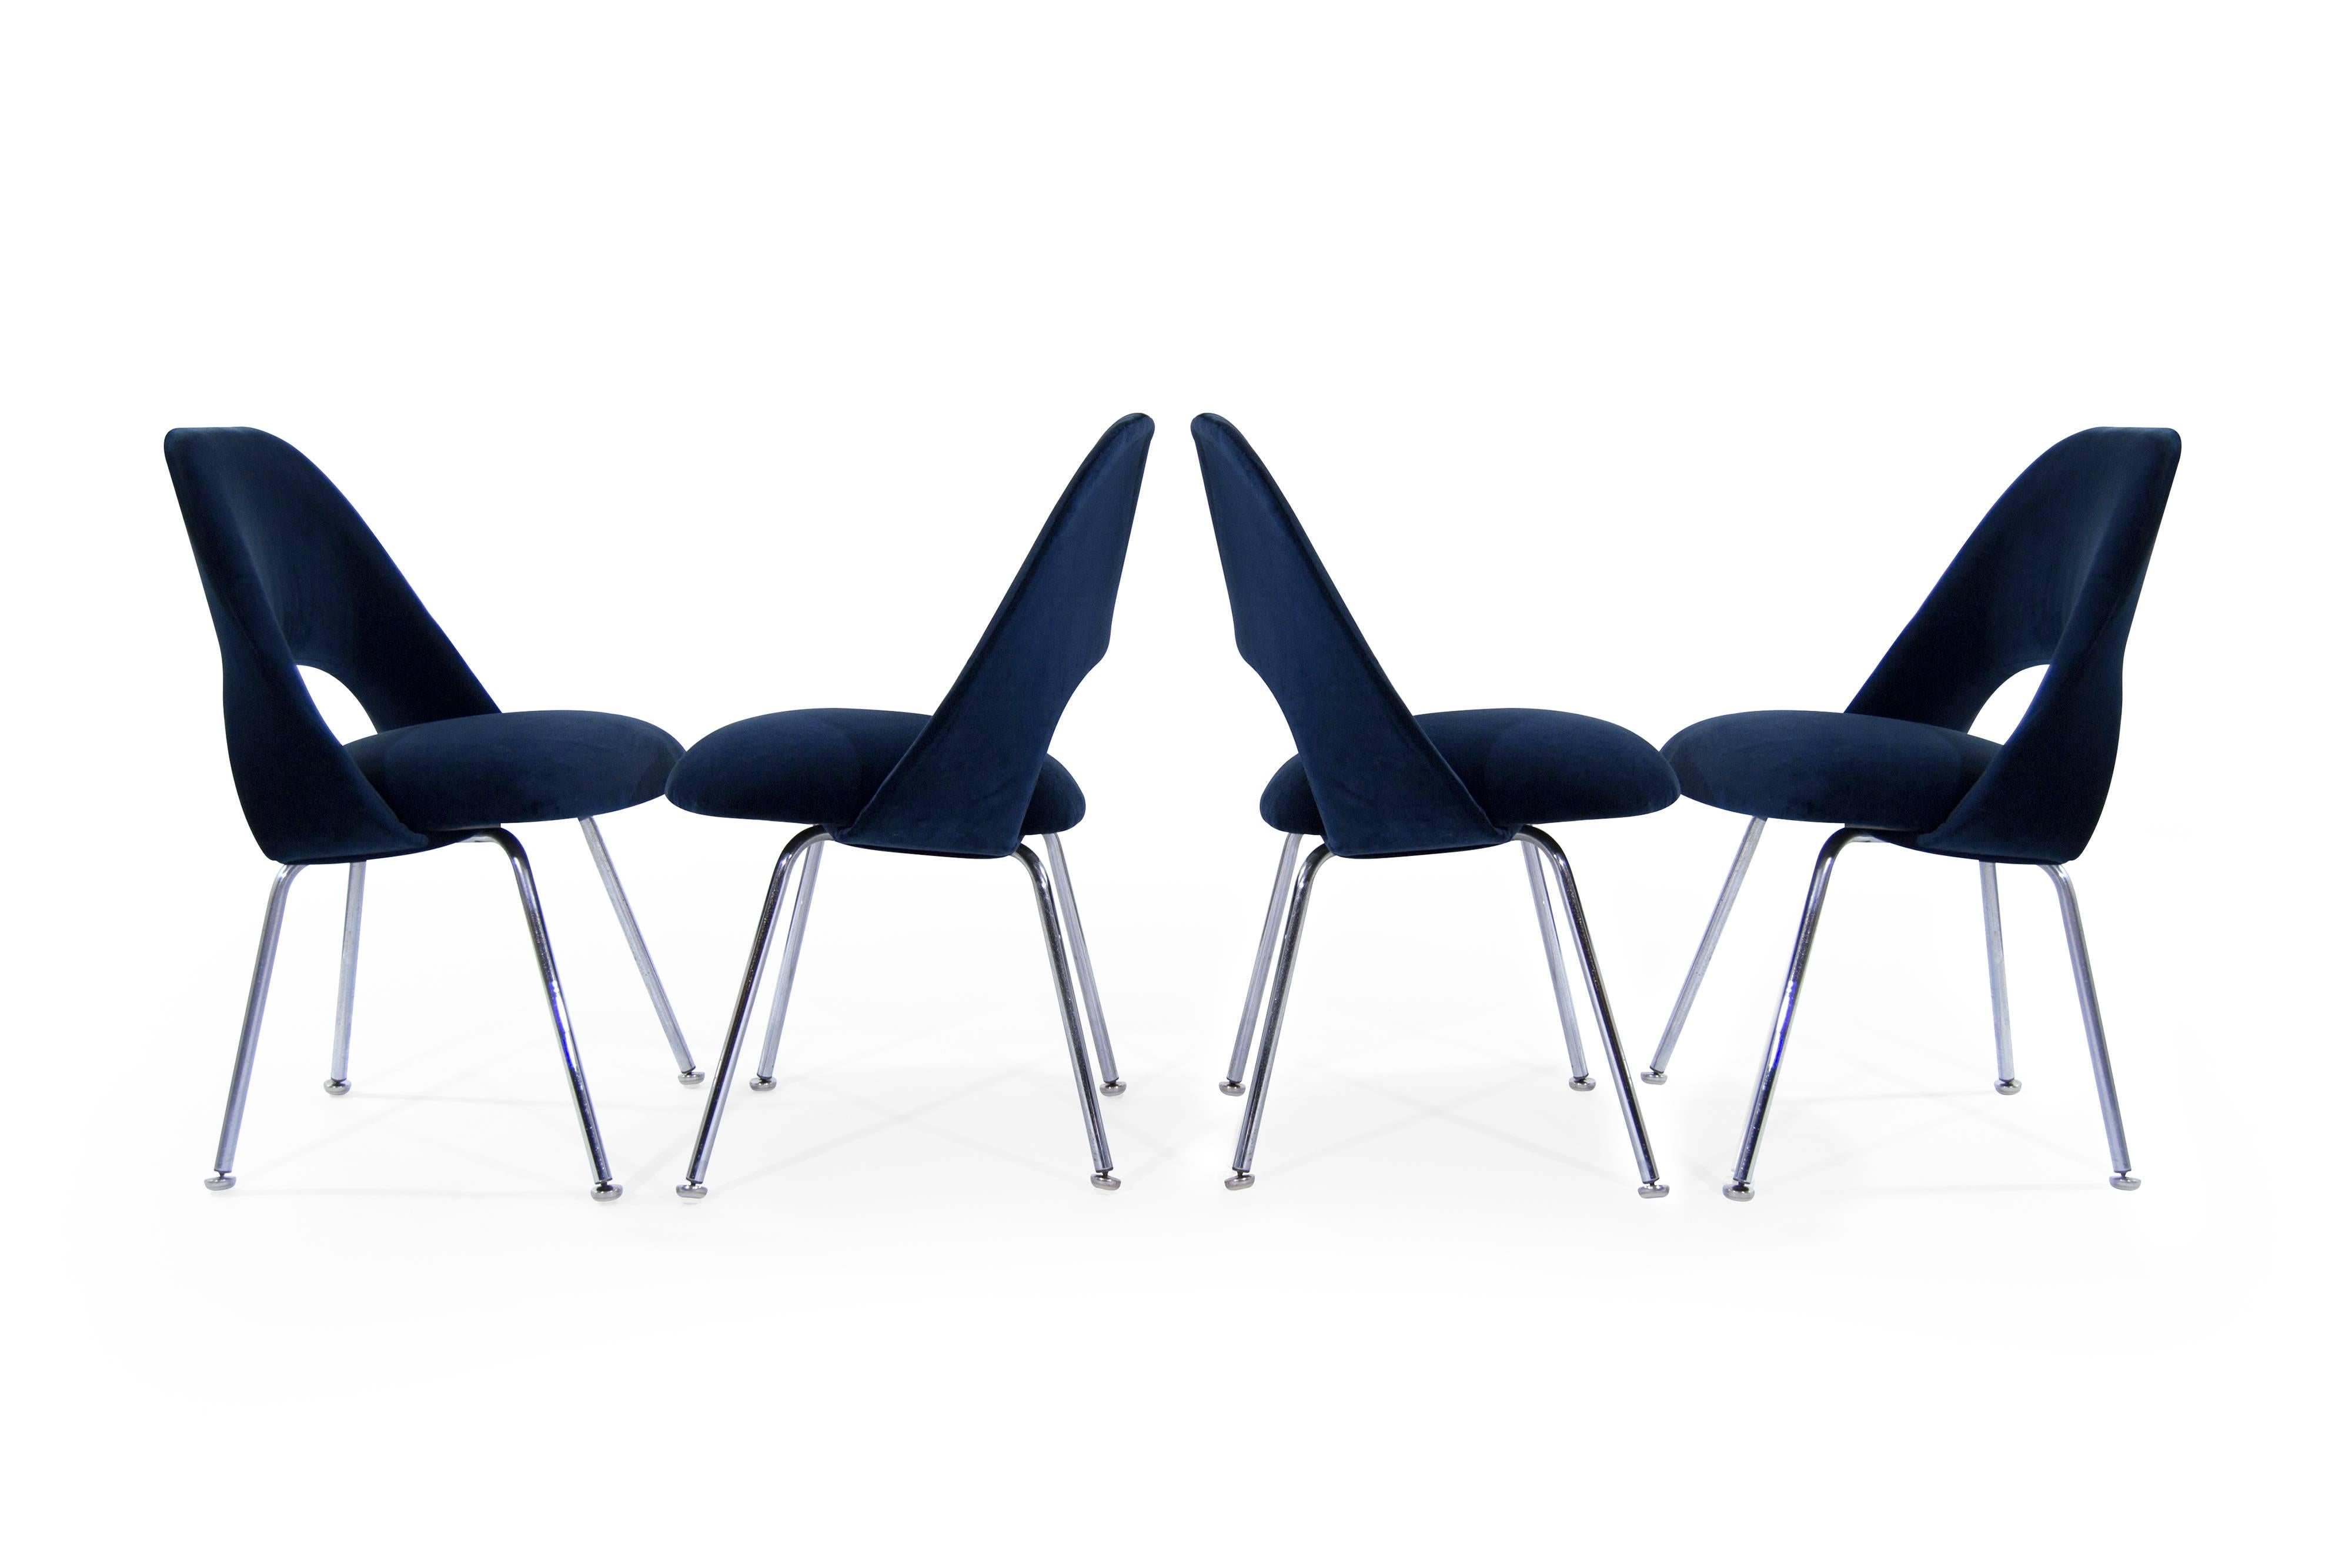 A set of four newly upholstered executive side chairs by Eero Saarinen, newly upholstered in navy velvet.